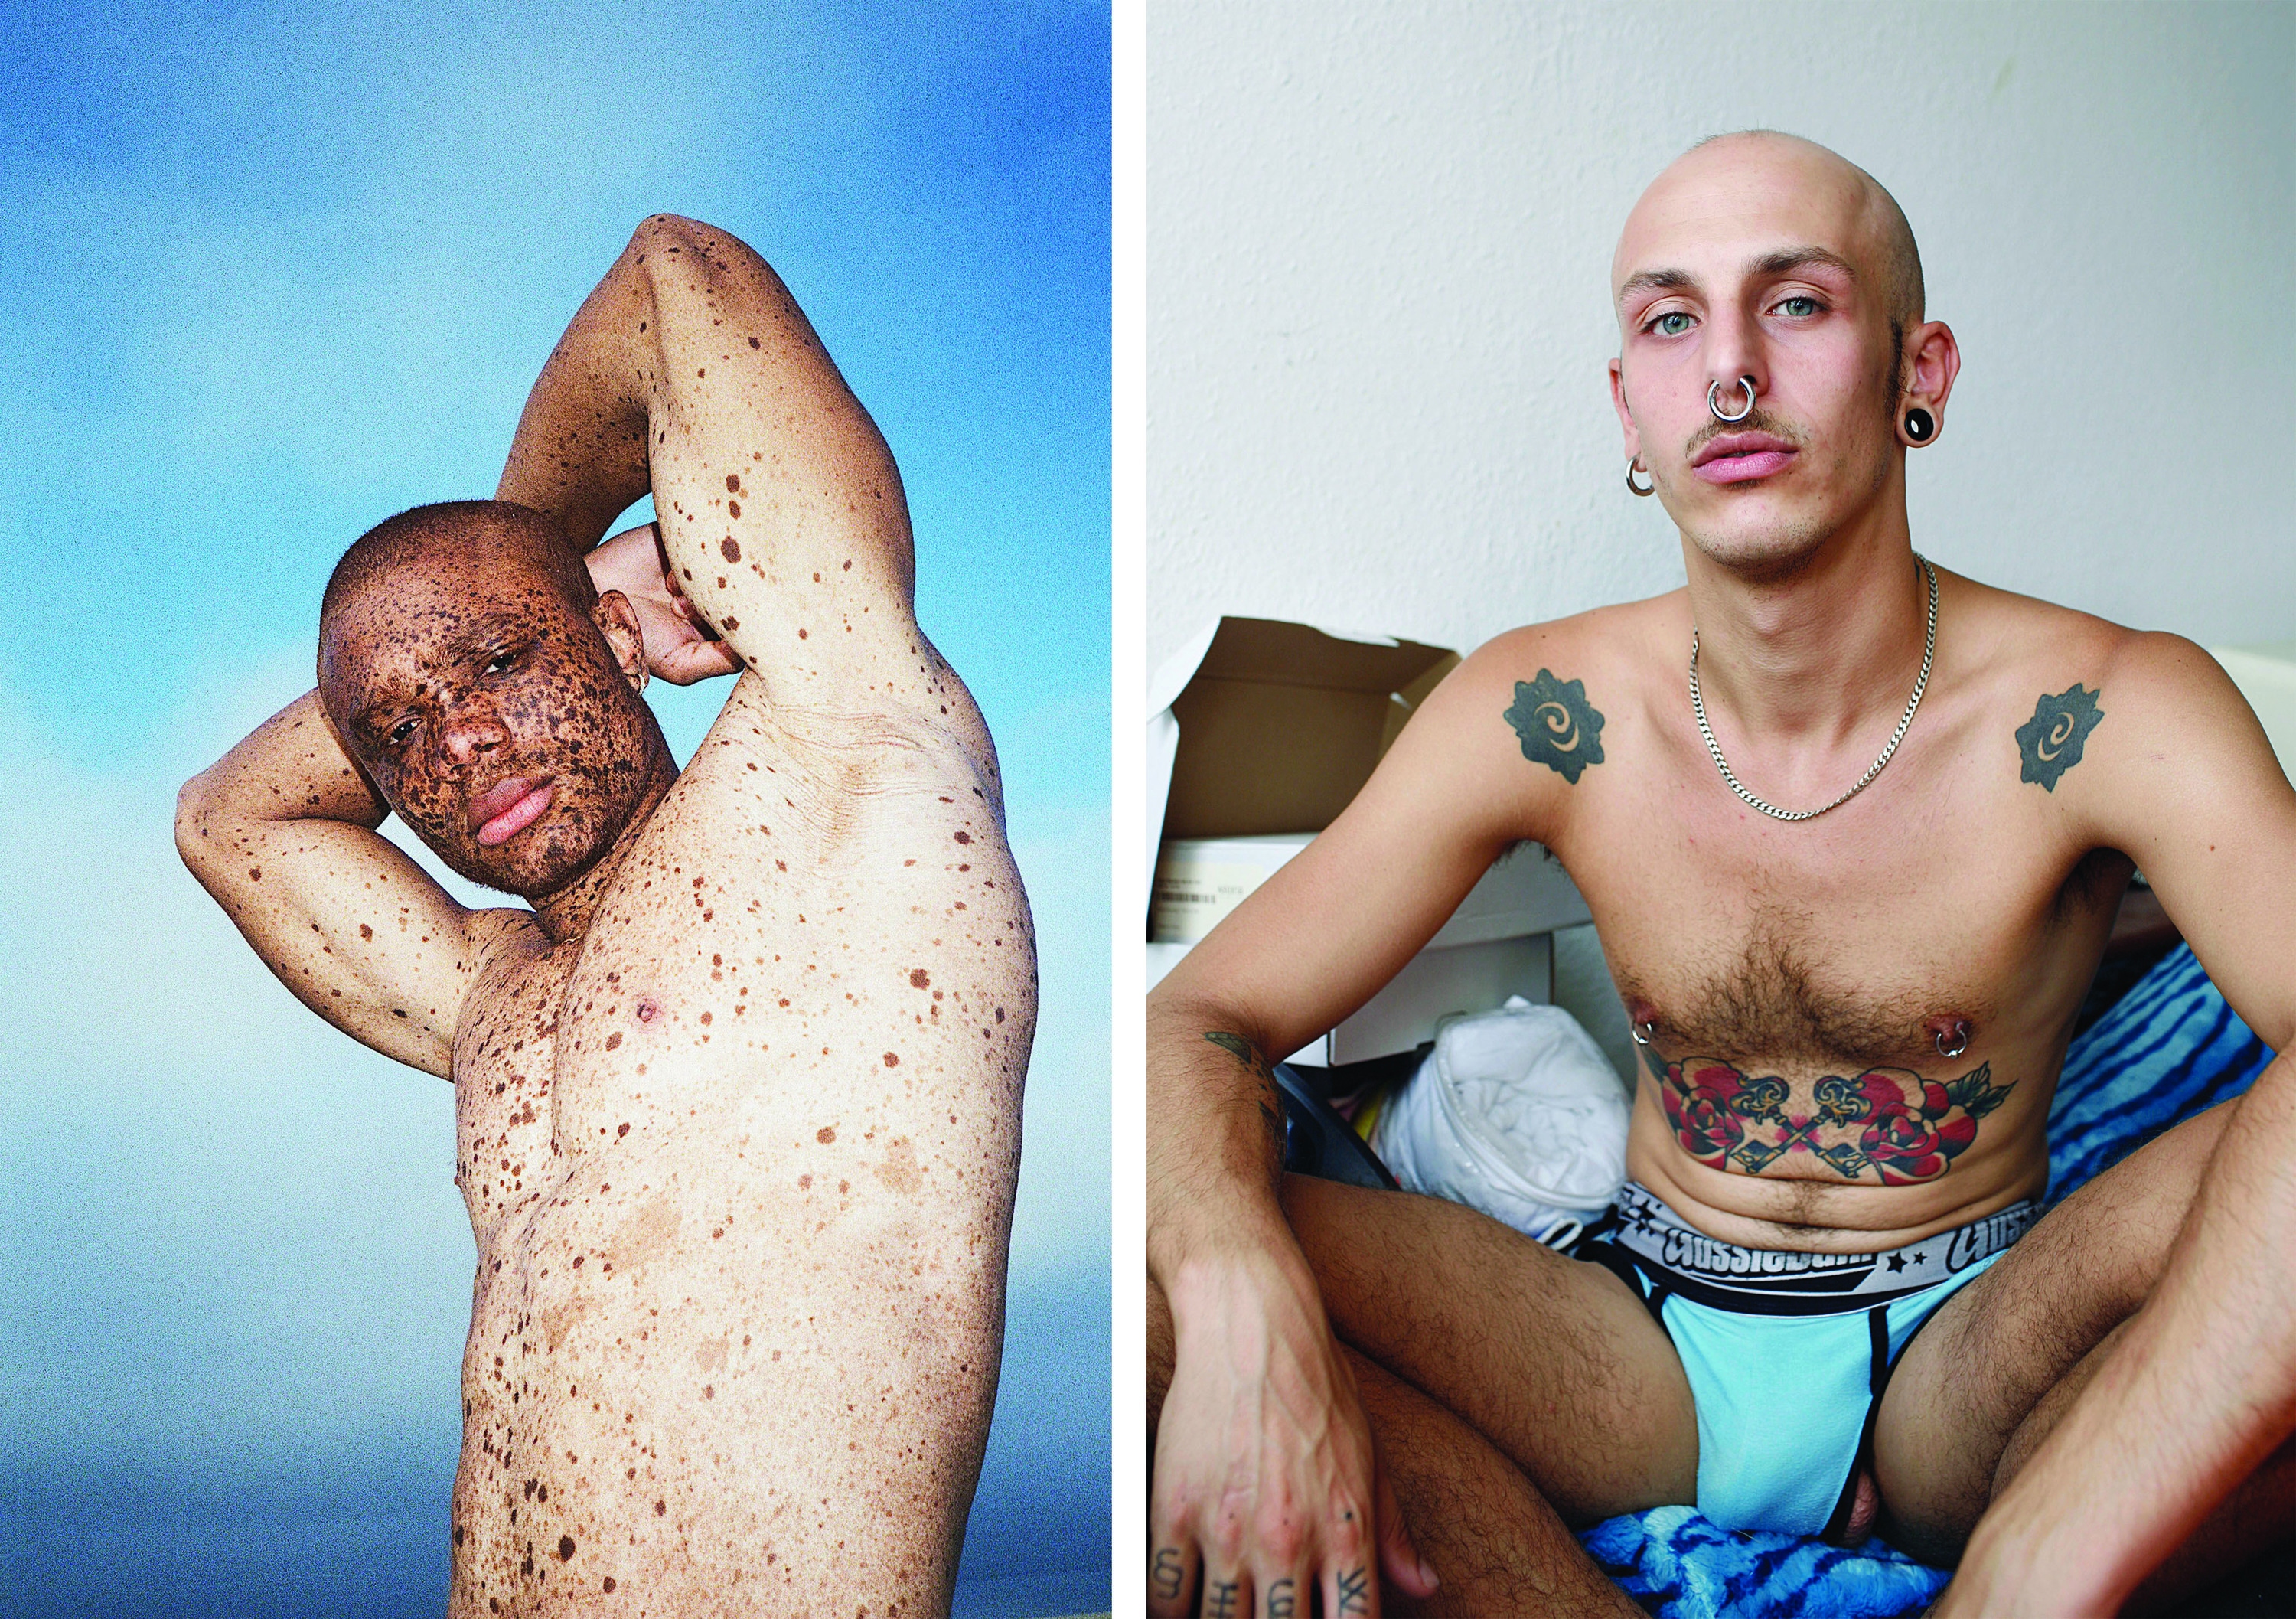 Left, a man with many freckles in front of a blue background with his arms over his head; right, a man with many tattoos in his underwear and a necklace on a blue blanket